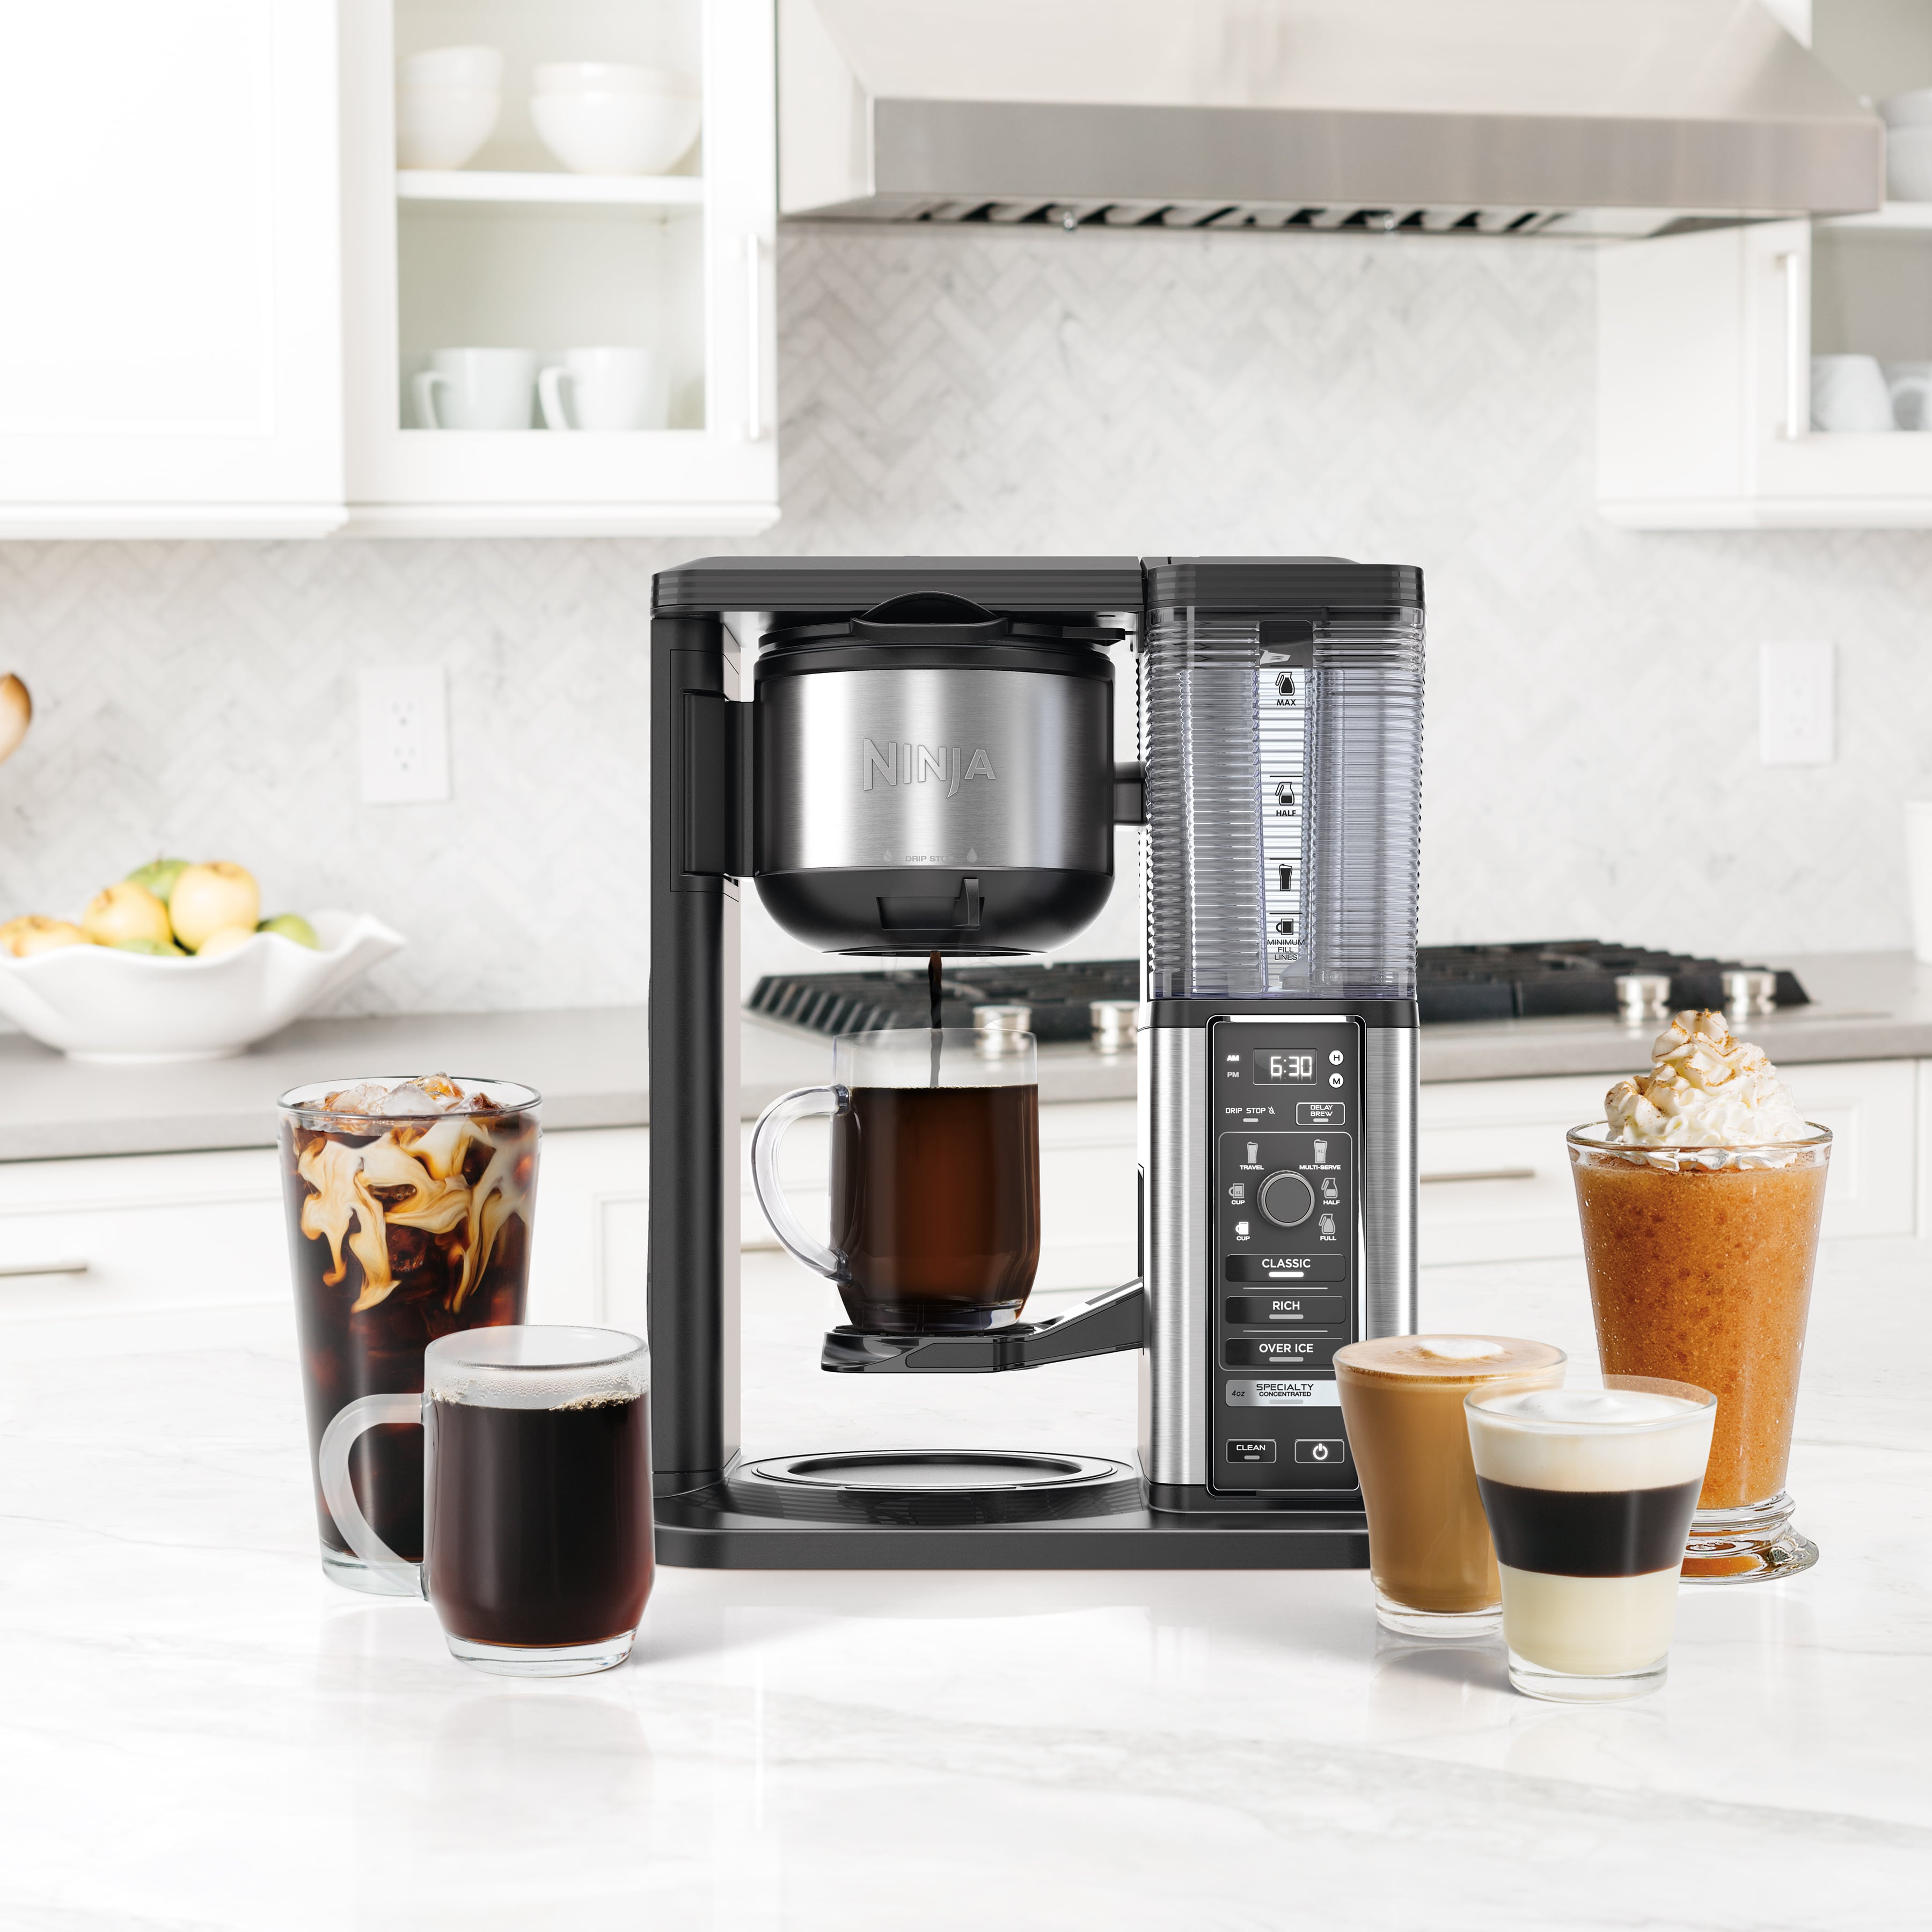 Ninja Specialty Coffee Maker review: enjoy your own personal